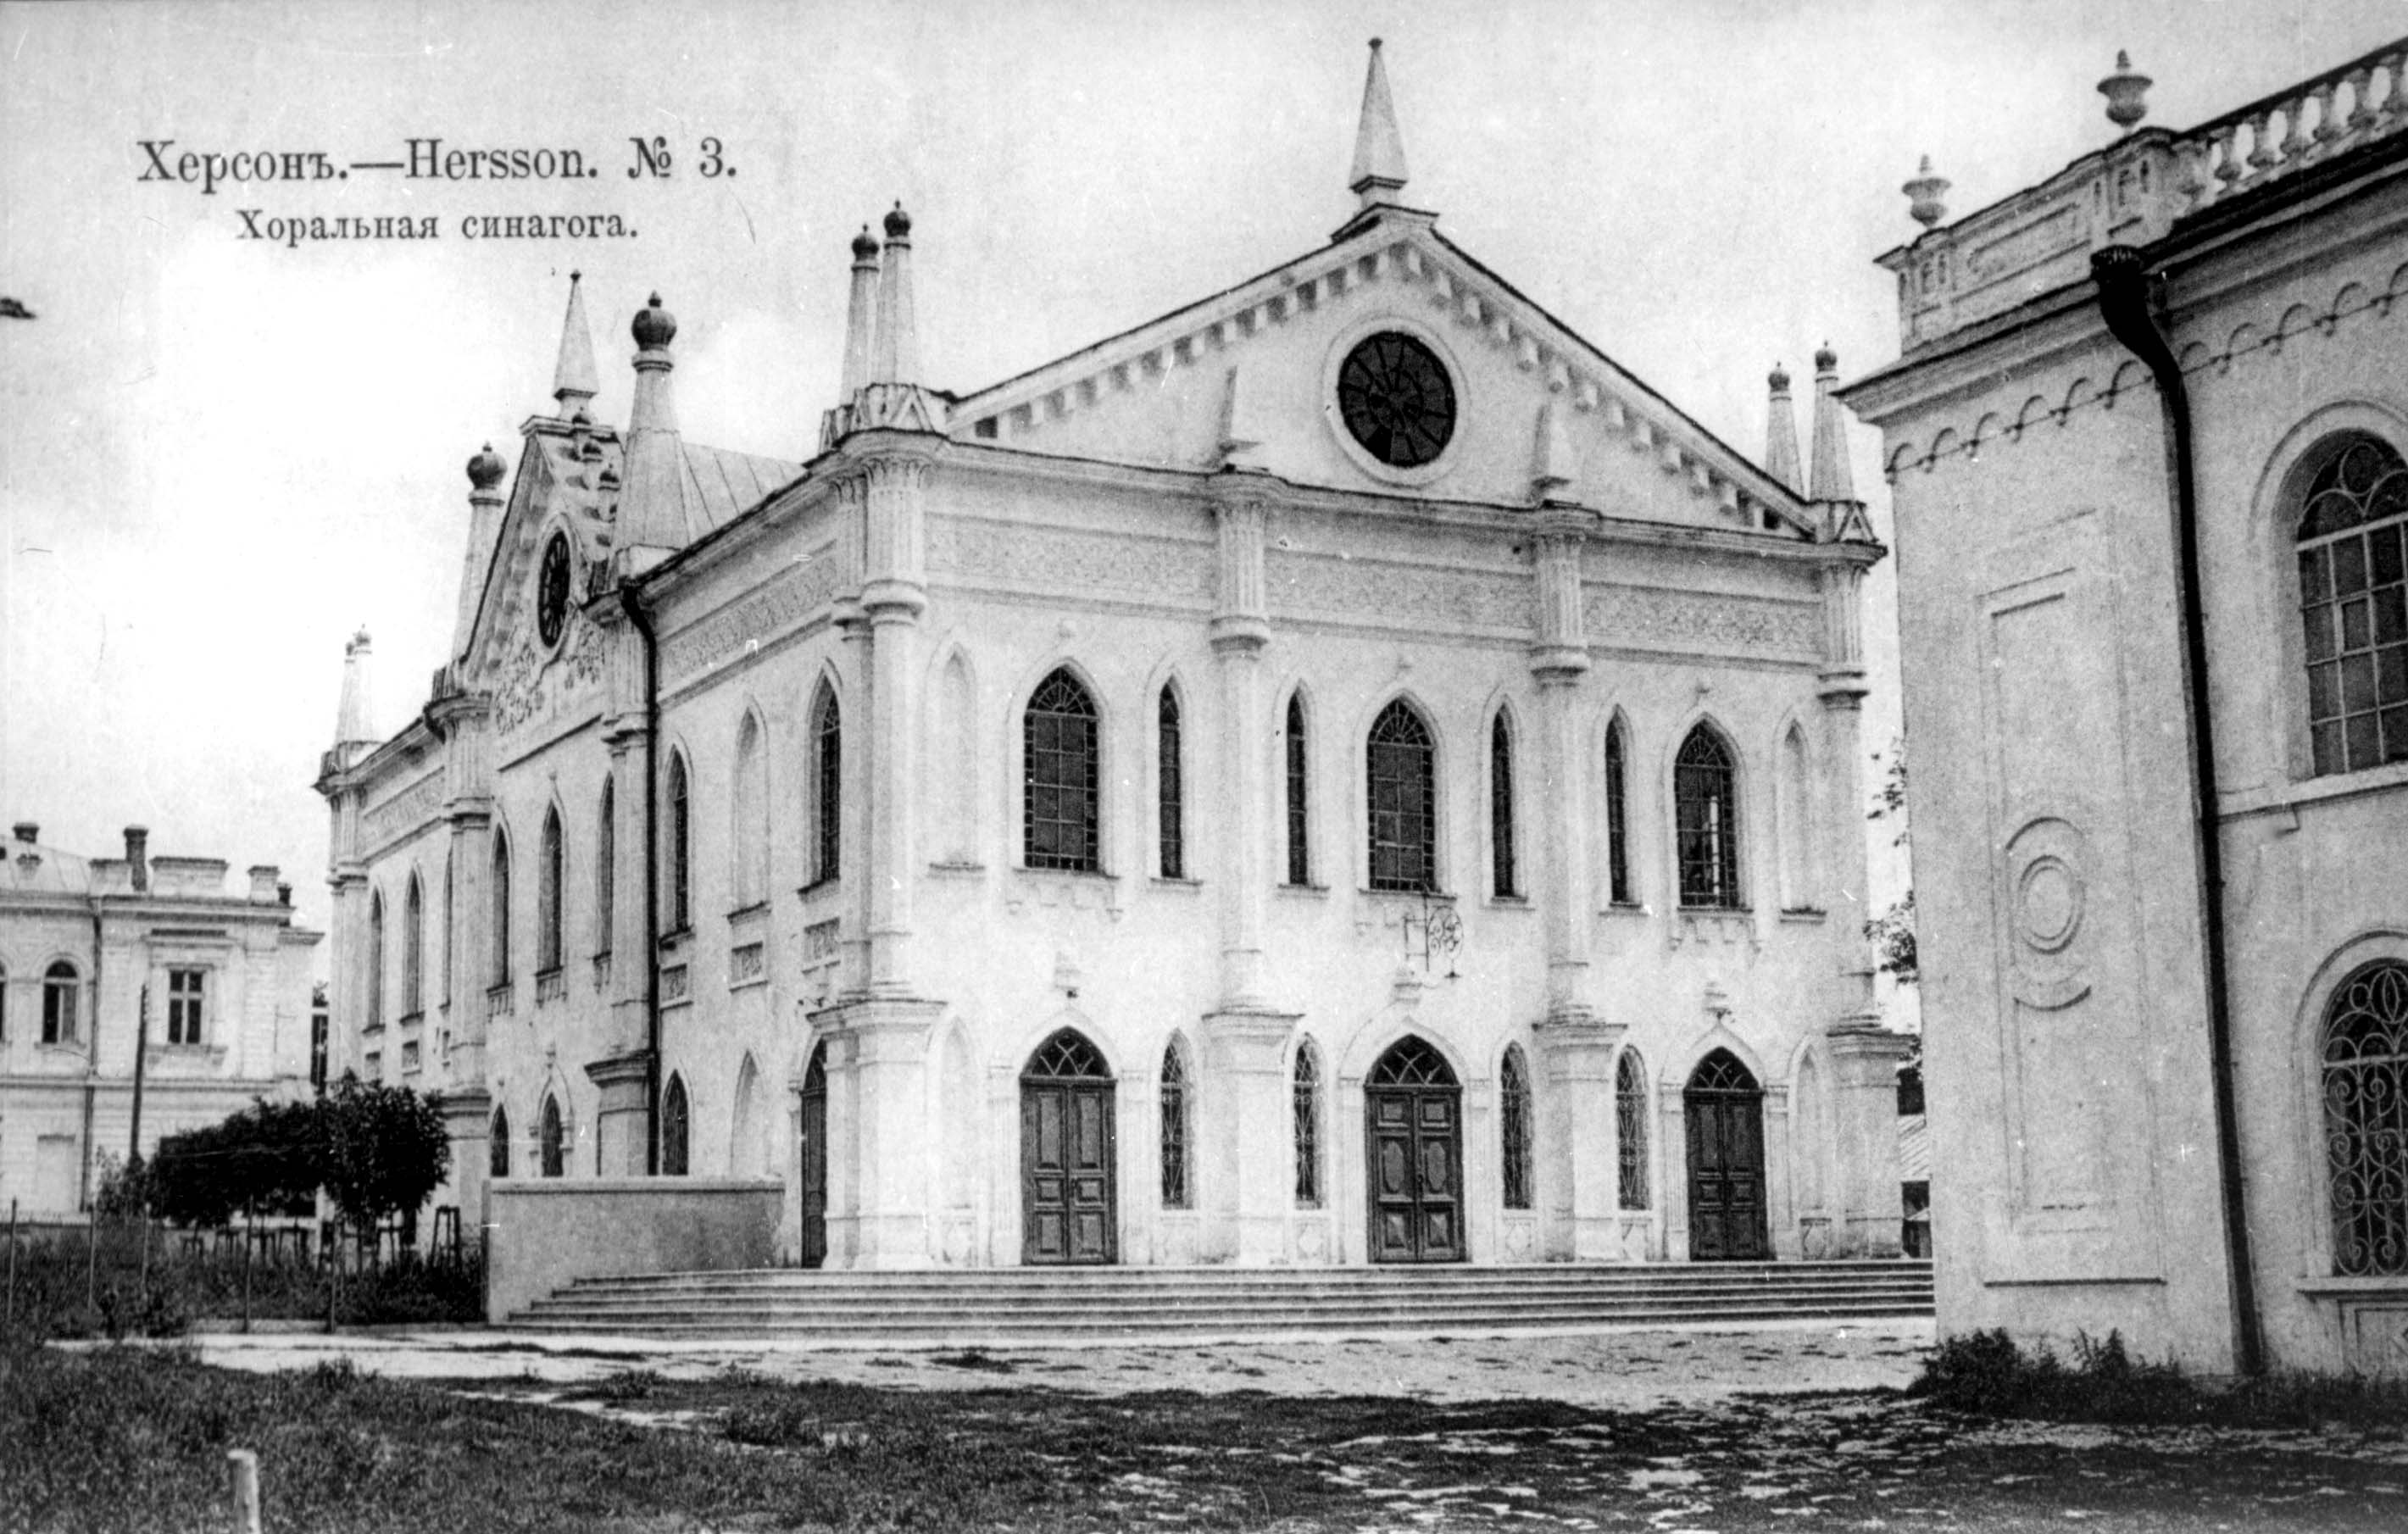 Great Choral Synagogue of Kherson